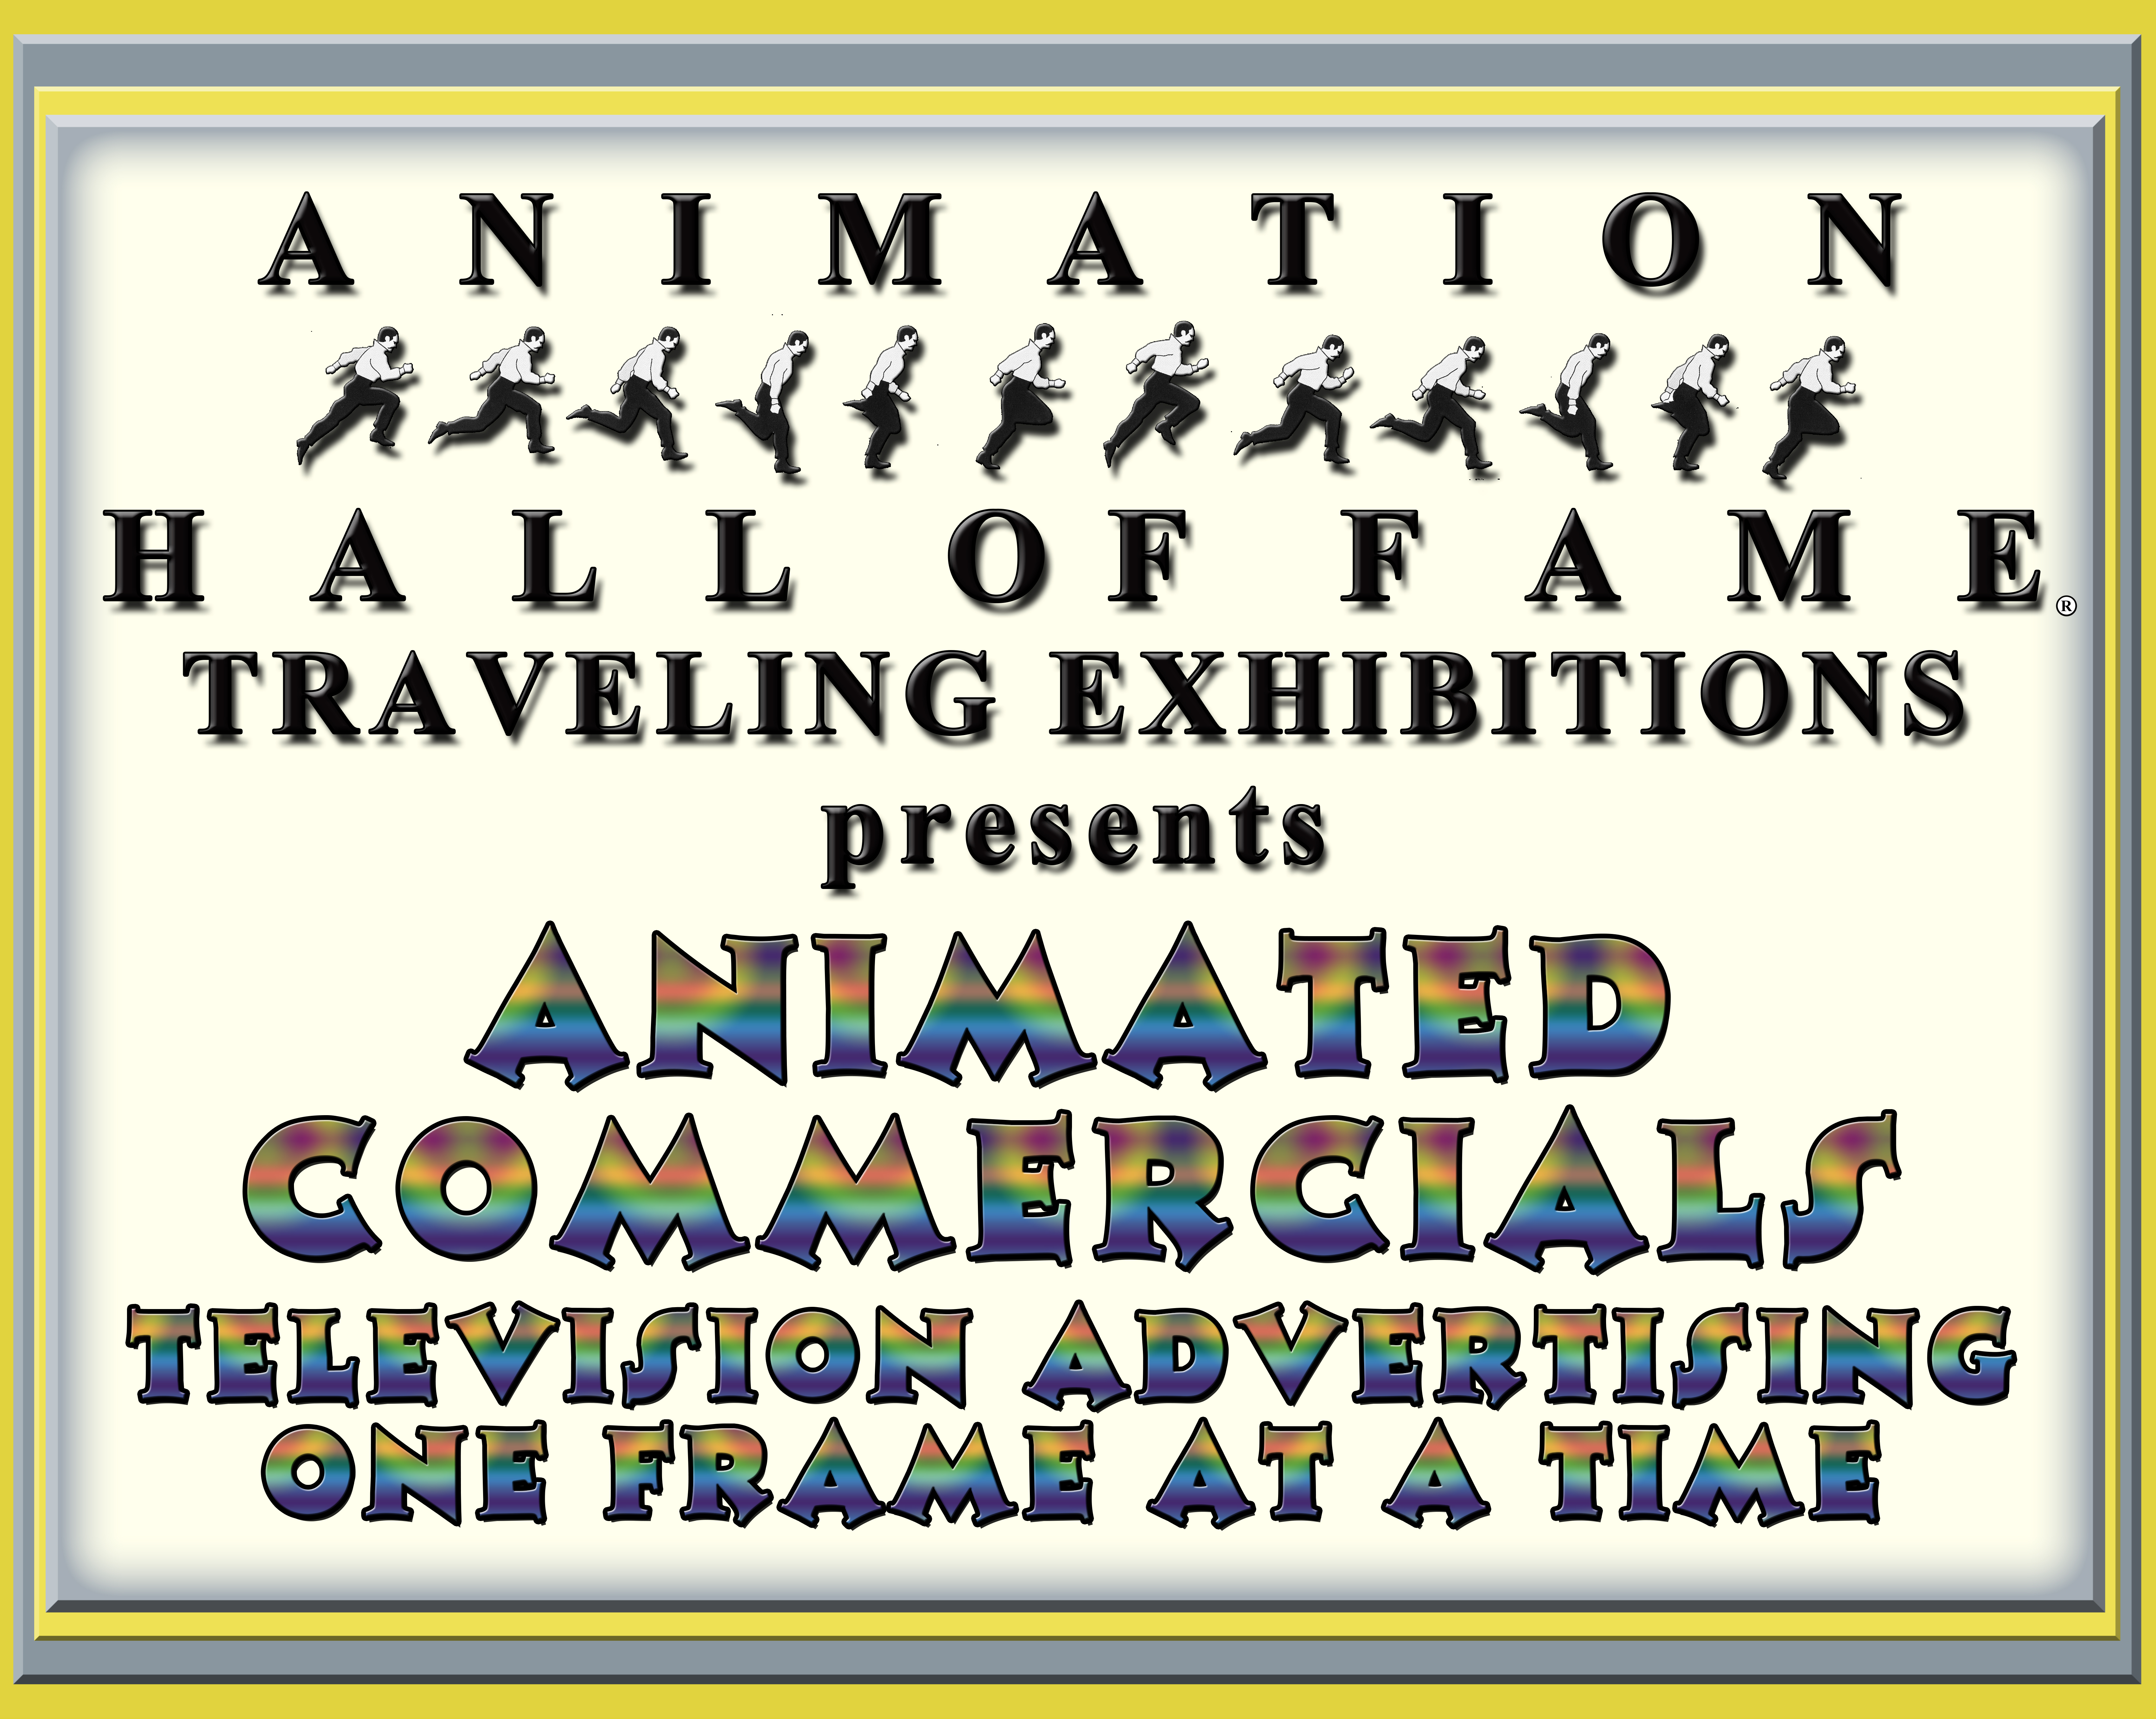 Animation Hall of Fame Traveling Exhibitions Presents Animated Commercials Television Advertising One Frame at a Time